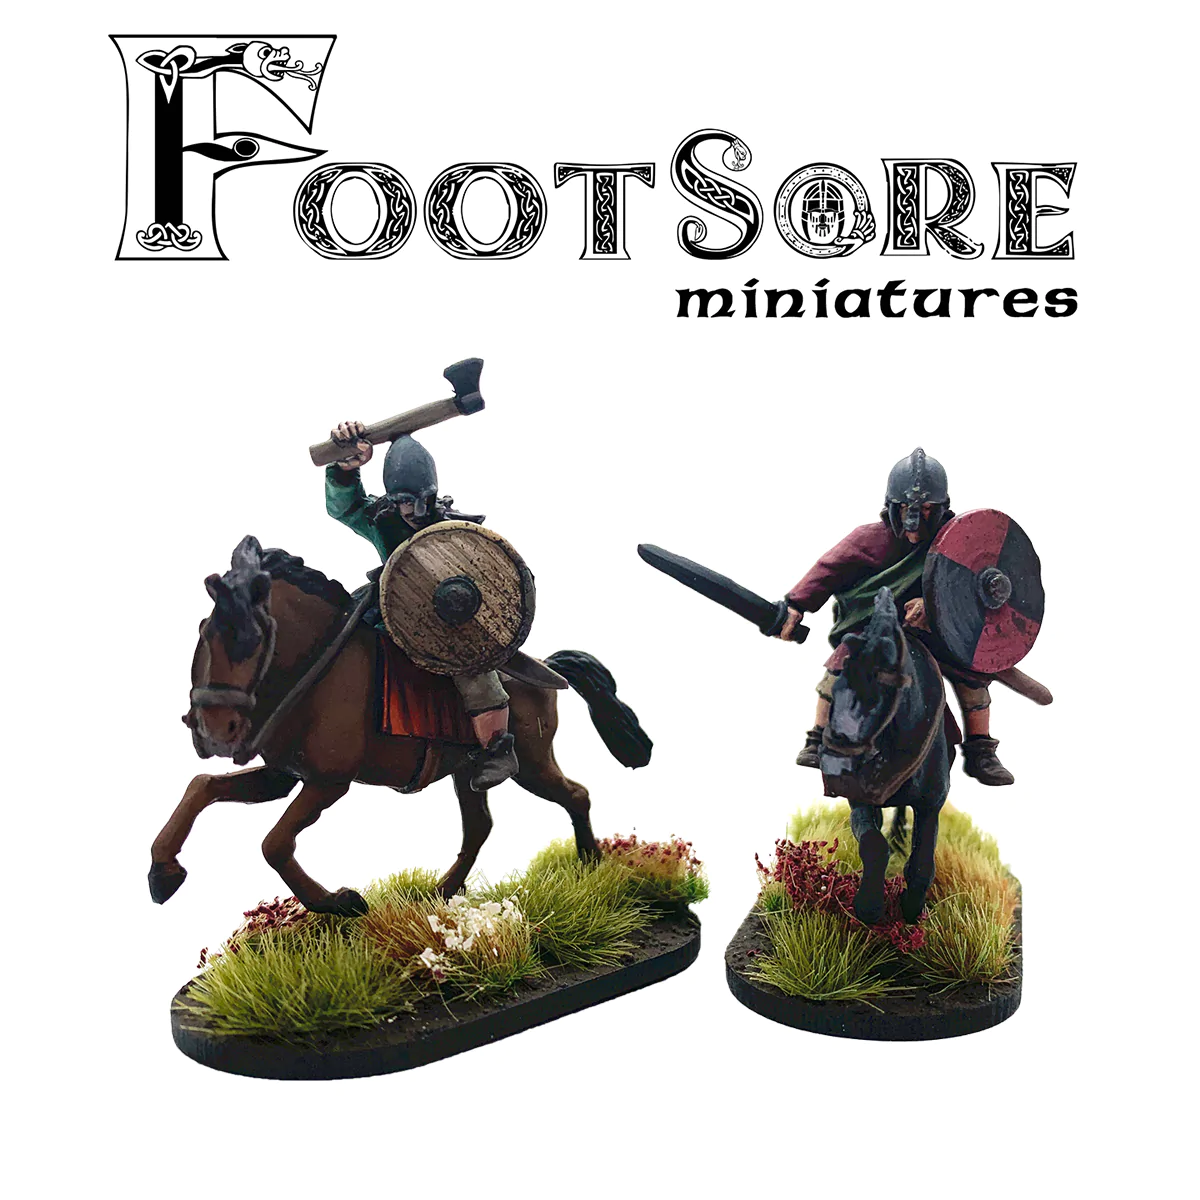 Footsore Miniatures WLS201HS Welsh Medieval Cavalry